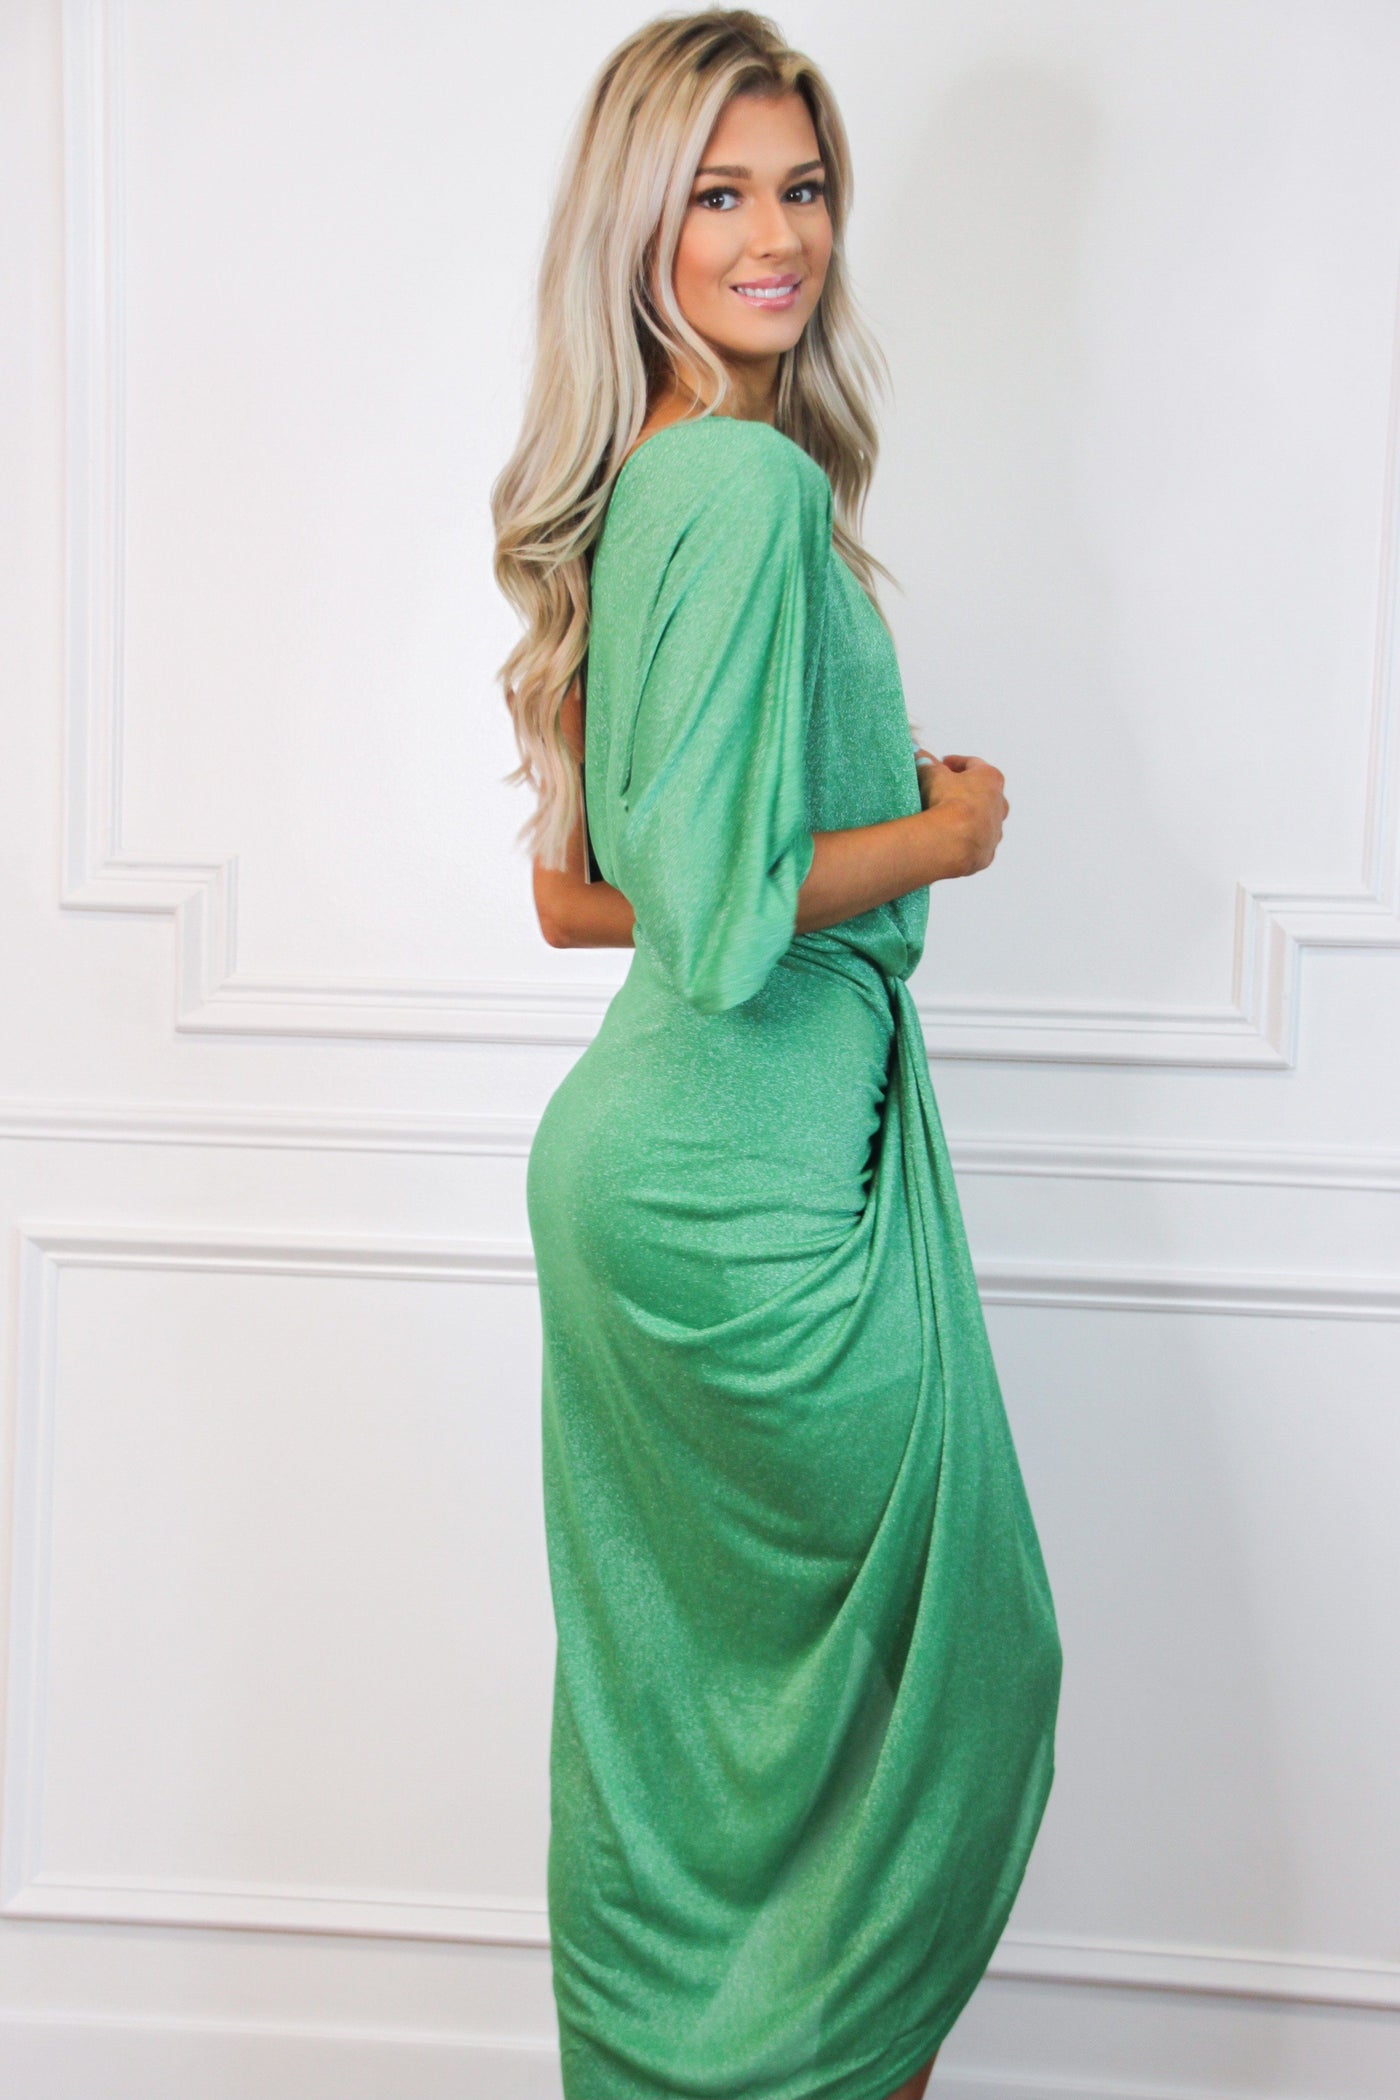 Hold You Tight Sparkly Midi Dress: Kelly Green - Bella and Bloom Boutique